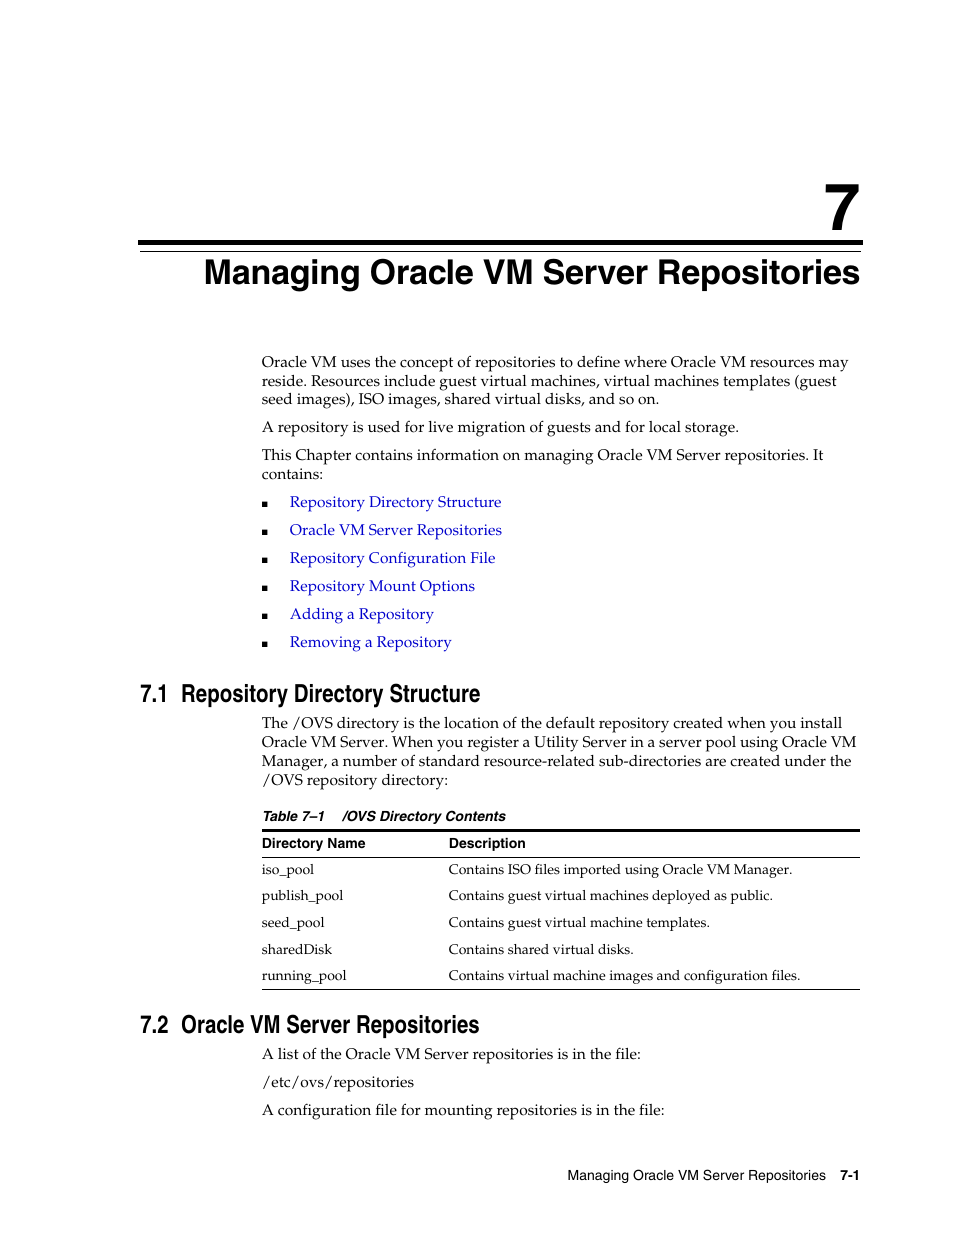 7 managing oracle vm server repositories, 1 repository directory structure, 2 oracle vm server repositories | Managing oracle vm server repositories | Oracle Audio Technologies E10898-02 User Manual | Page 51 / 112